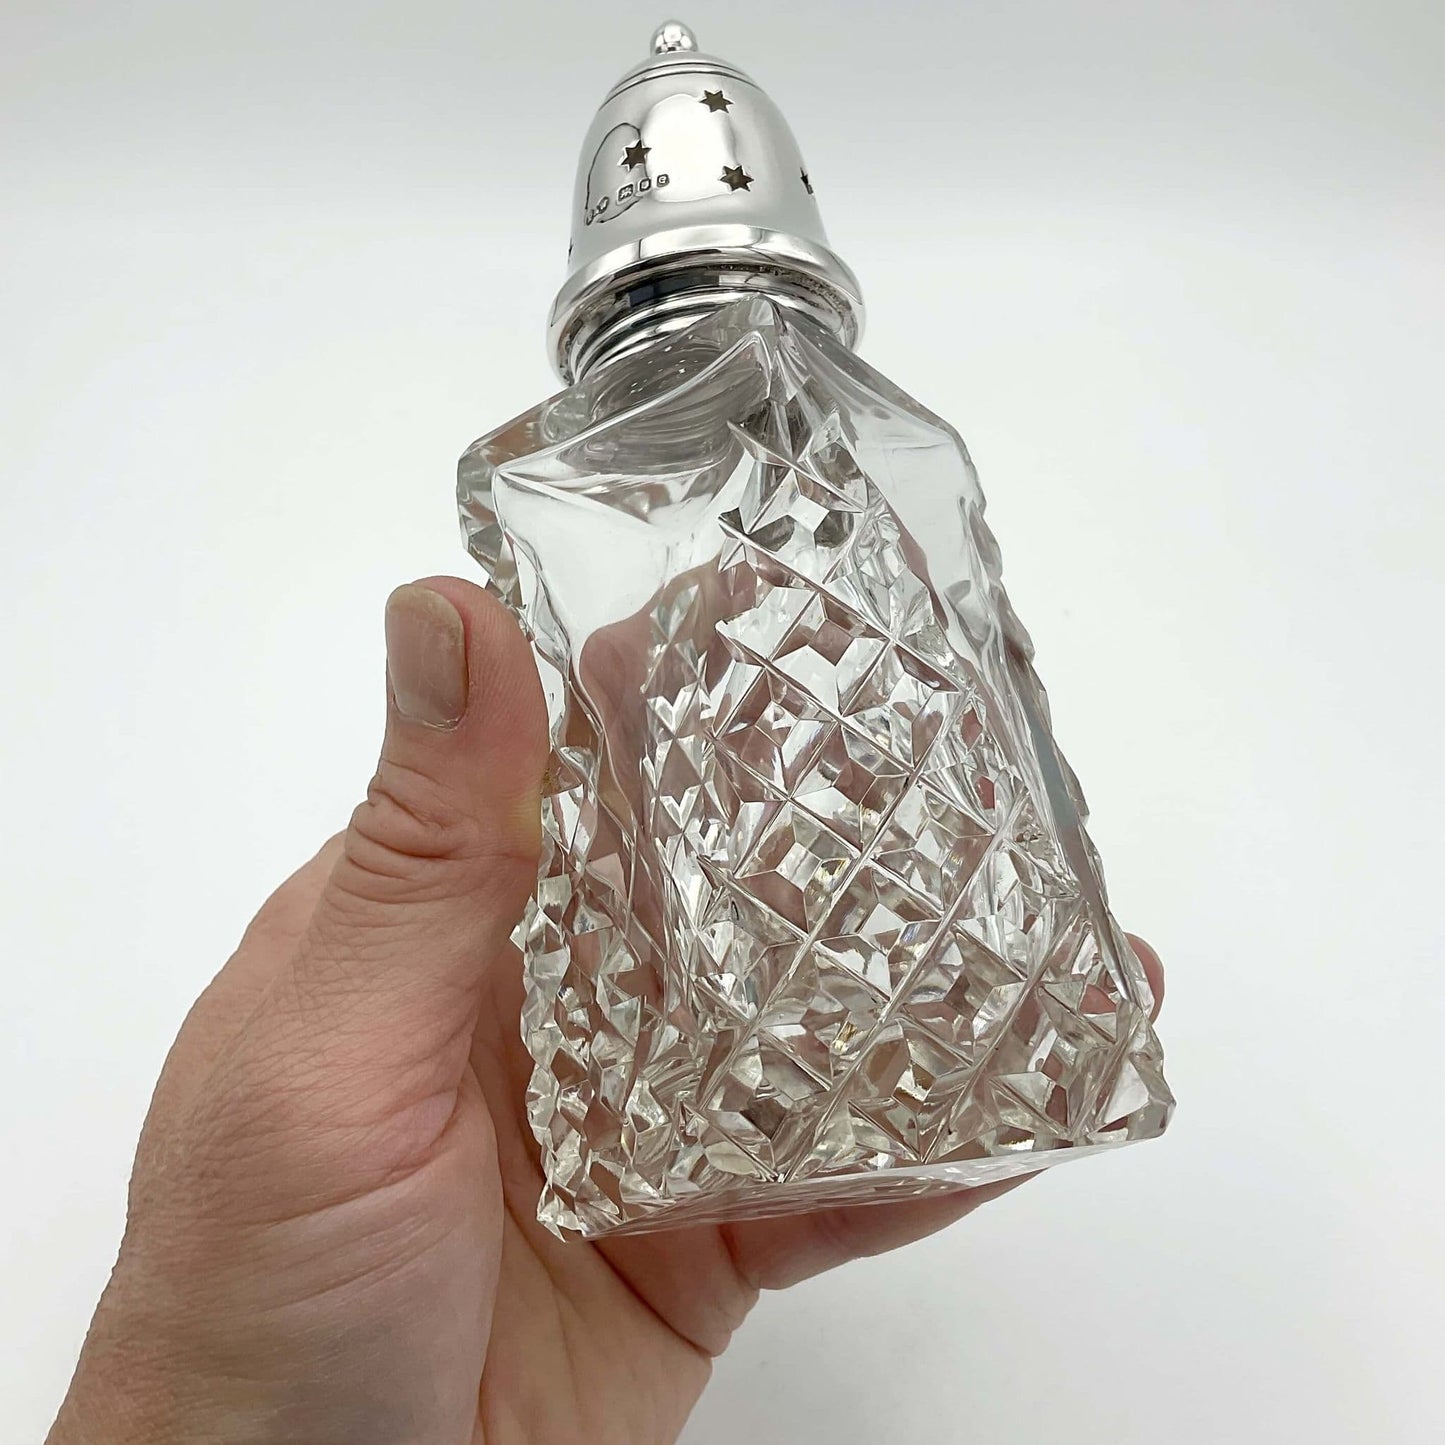 Crystal glass design to sides of sugar shaker held in a hand